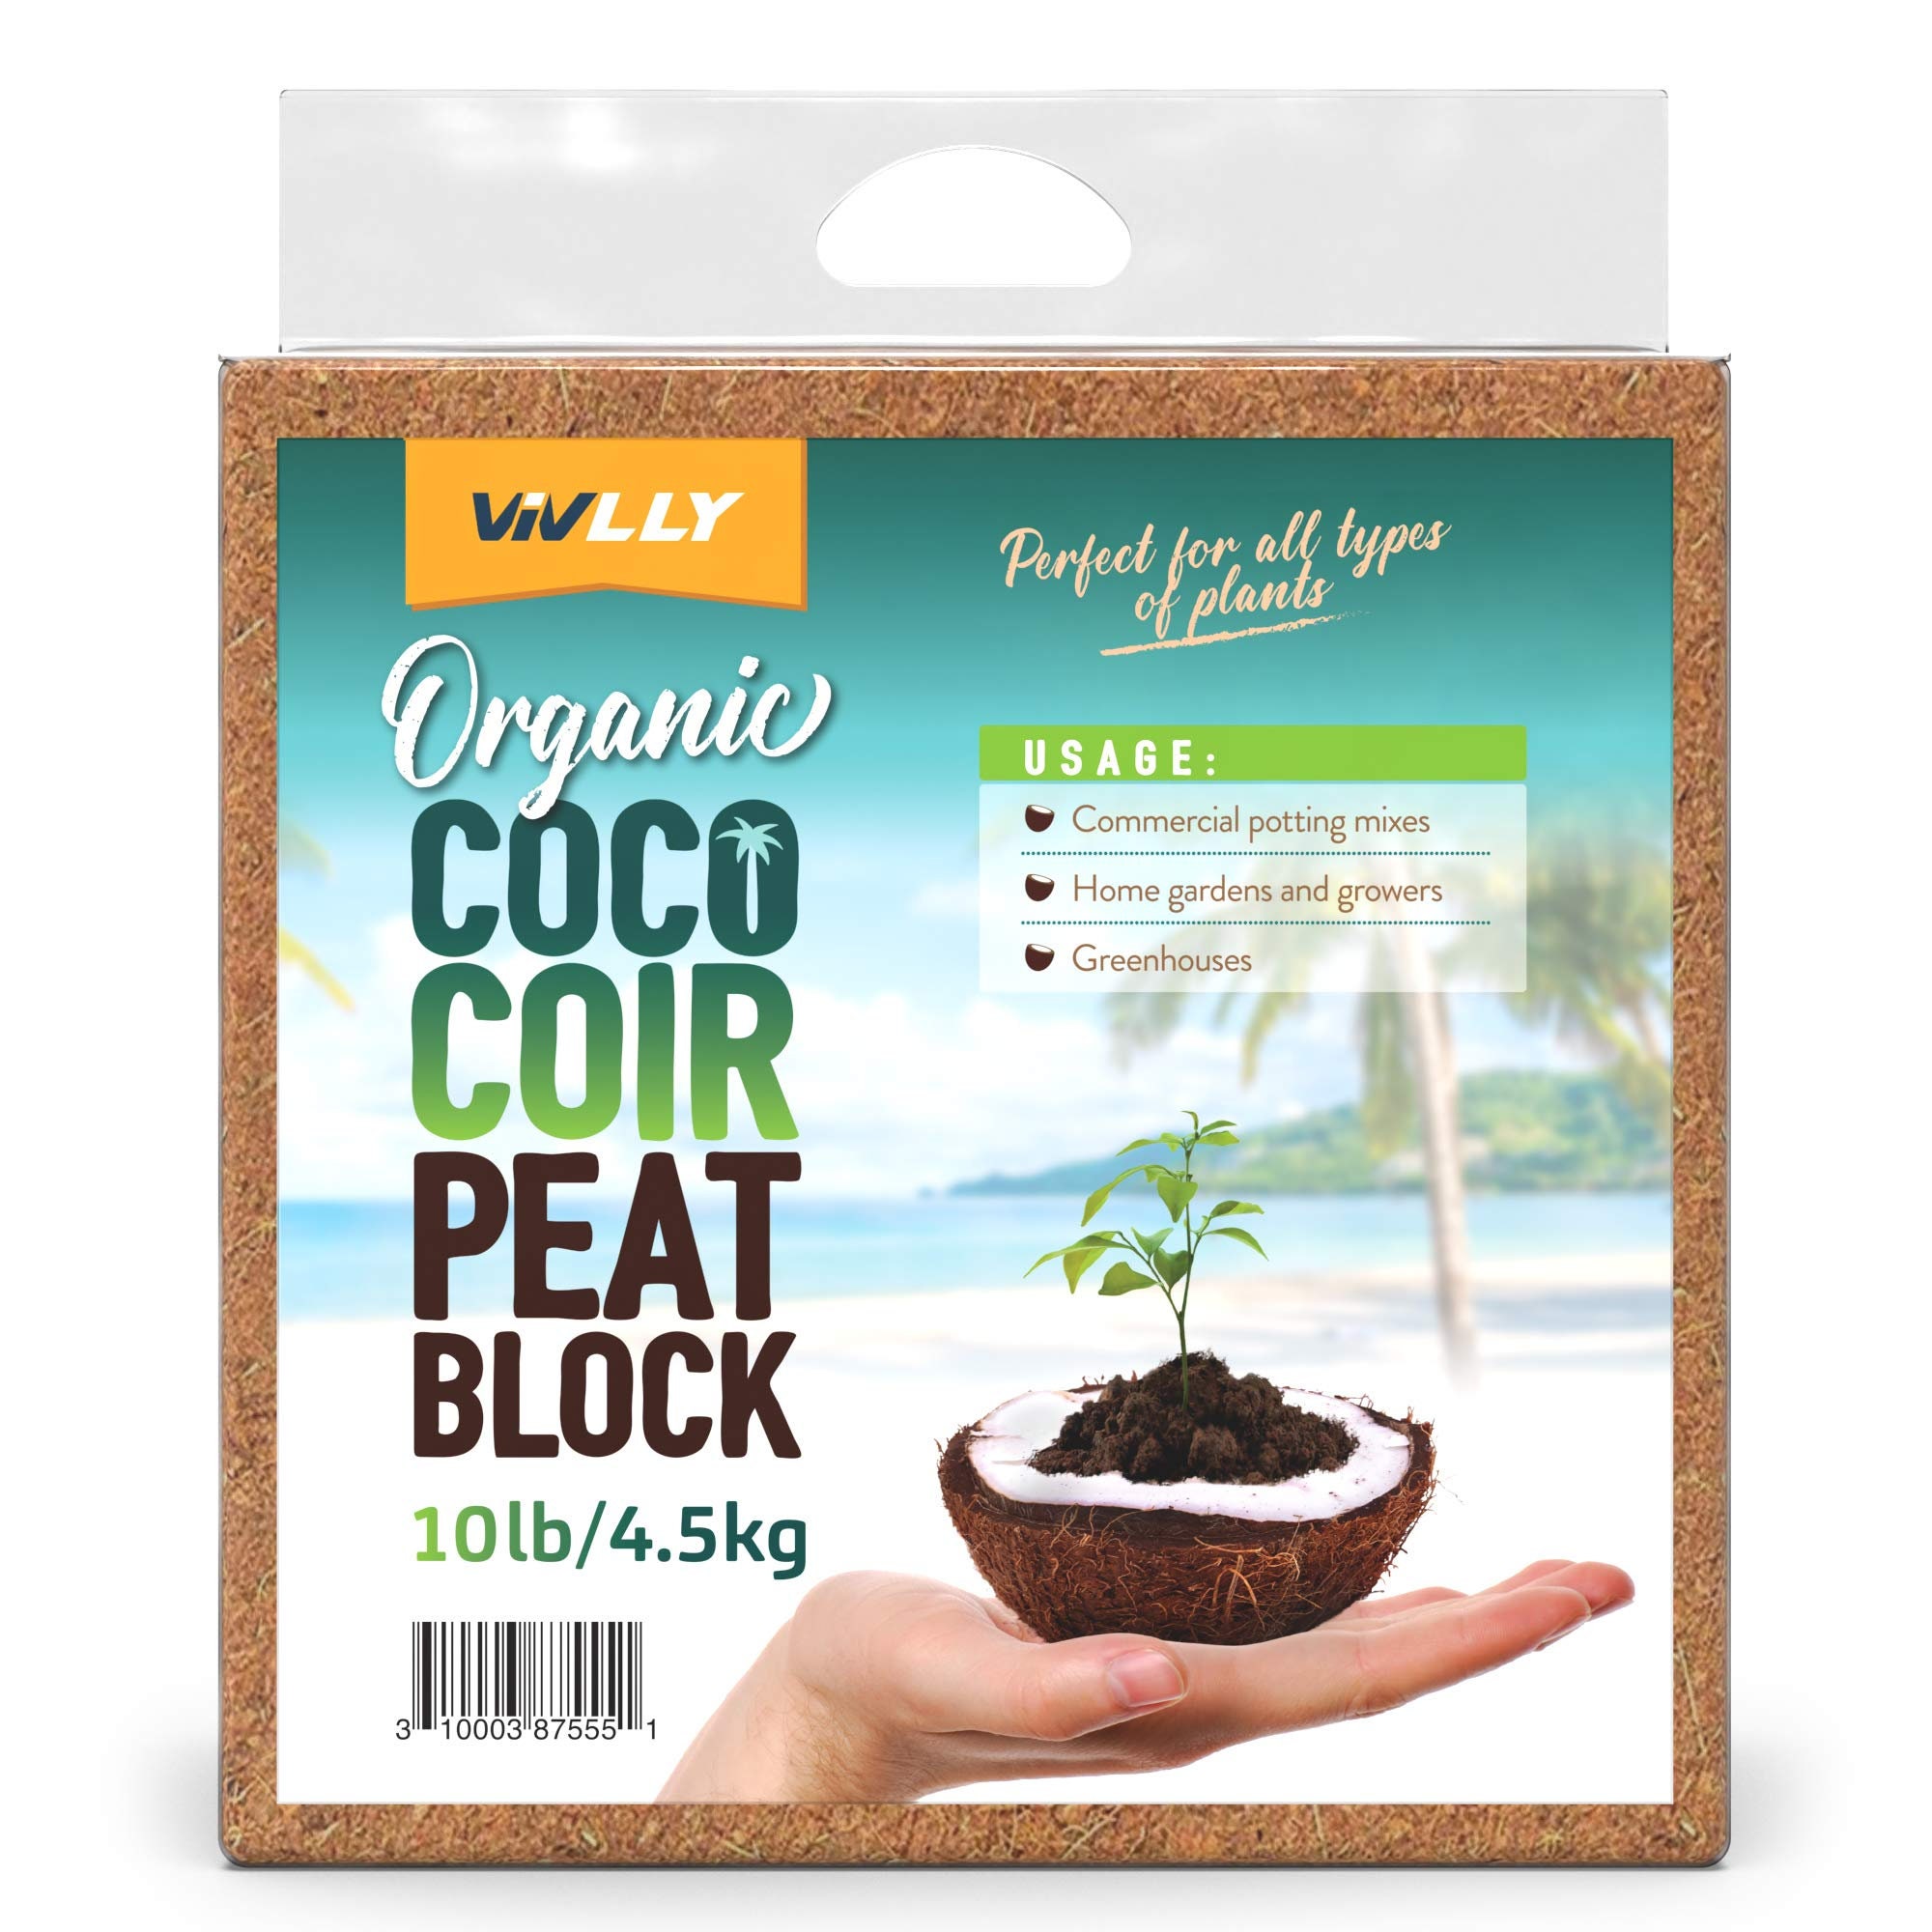 Compressed Coco Peat Organic Coir Block 10 Pounds Pack Natural Seed Starter  With Low EC and PH Balance by Vivlly Planting Soil Mix 